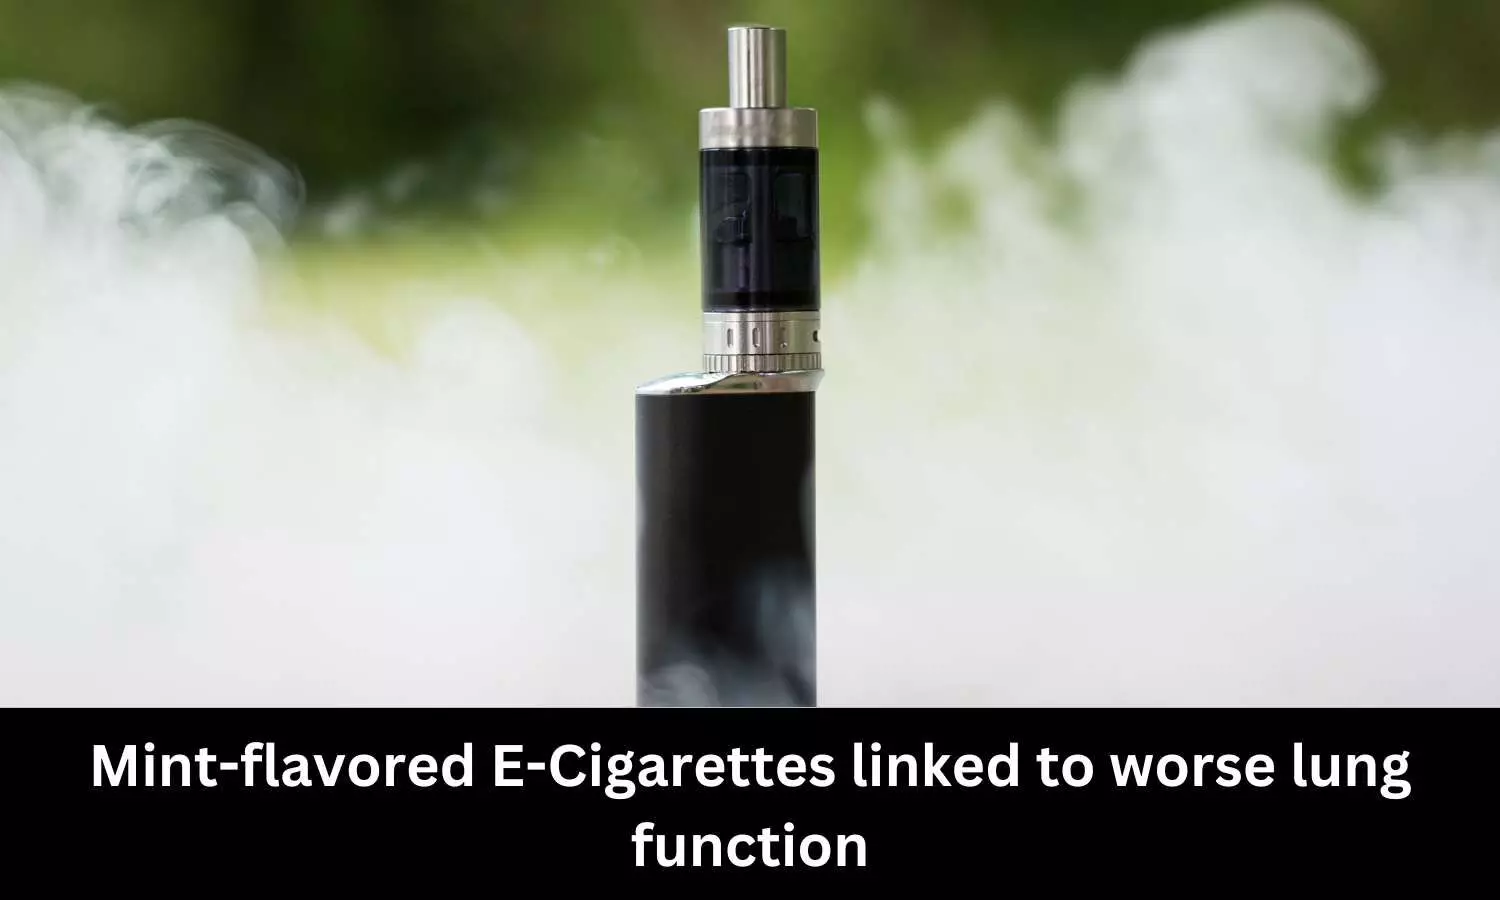 Mint-flavored E-Cigarettes linked to worse lung function